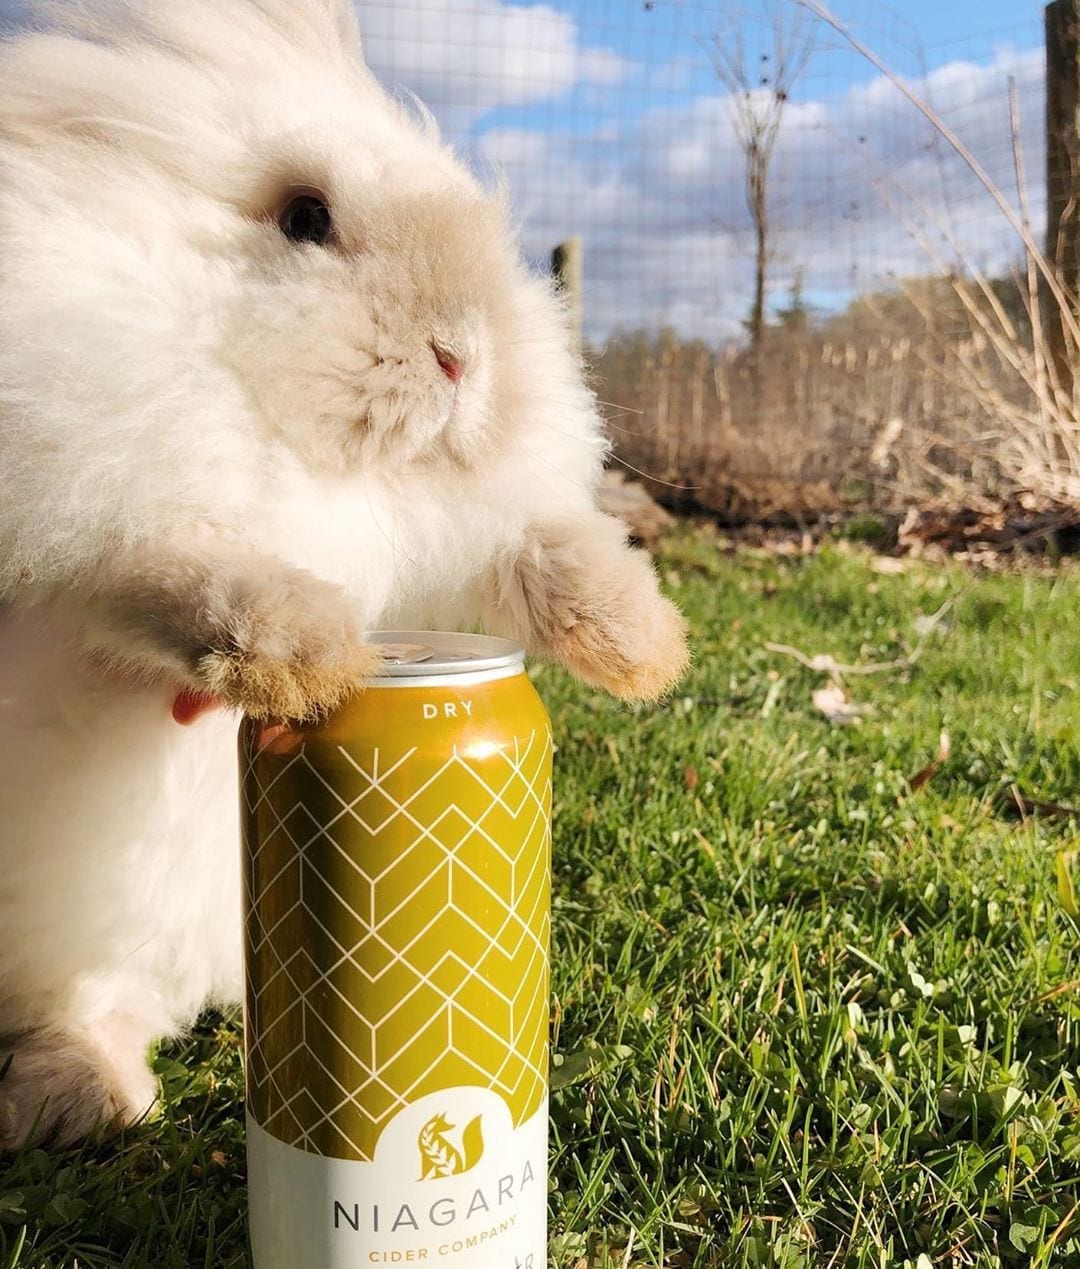 Happy Easter Friends
🐰💛🦊
.
.
.
.
.
.
.
[#easter #easterbunny #bunny #rabbit #cuteness #rabbitsofinstagram #supportlocalniagara #supportlocal #gardening #smallbusiness #cider #ciderlover #lcbo #lcbofoodanddrink #craftcider #ontariocider #socialdistancing #quarentine #pub #smalltown #gold #cidery #cider_society #pelham #supportlocalbreweries #covid_19 #inthistogether @thecidercrate @ciderfever @ciderscene #ontariocraftcider #hardcider #OntCider]